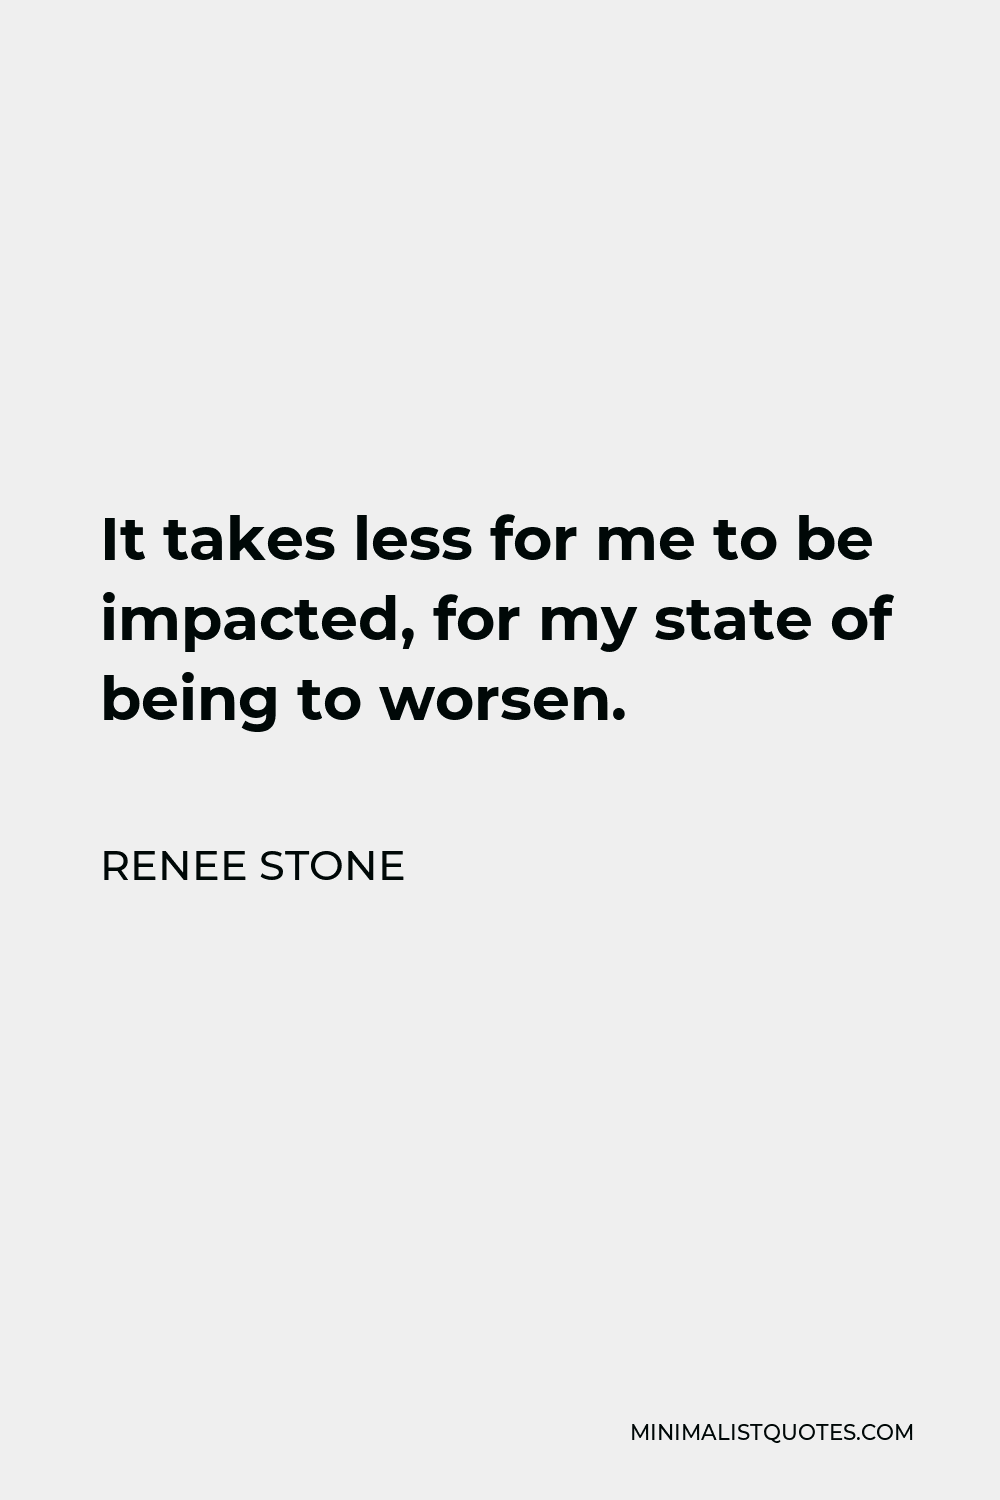 Renee Stone Quote - It takes less for me to be impacted, for my state of being to worsen.